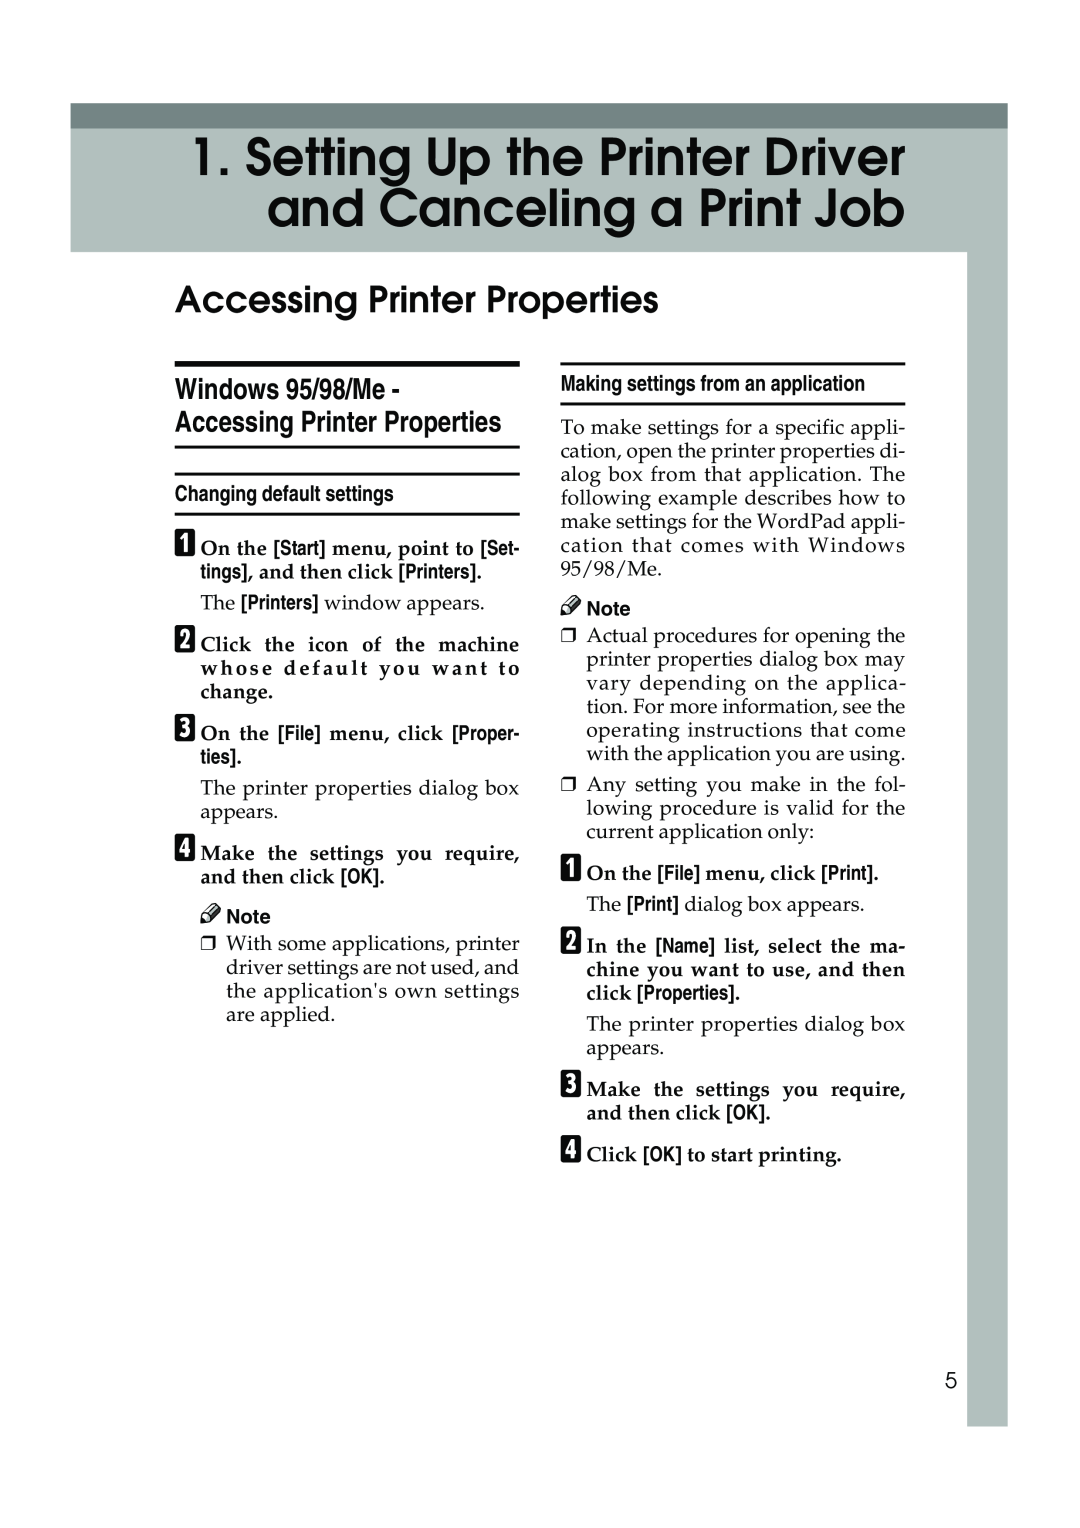 Xerox 2045e appendix Setting Up the Printer Driver and Canceling a Print Job, Accessing Printer Properties 